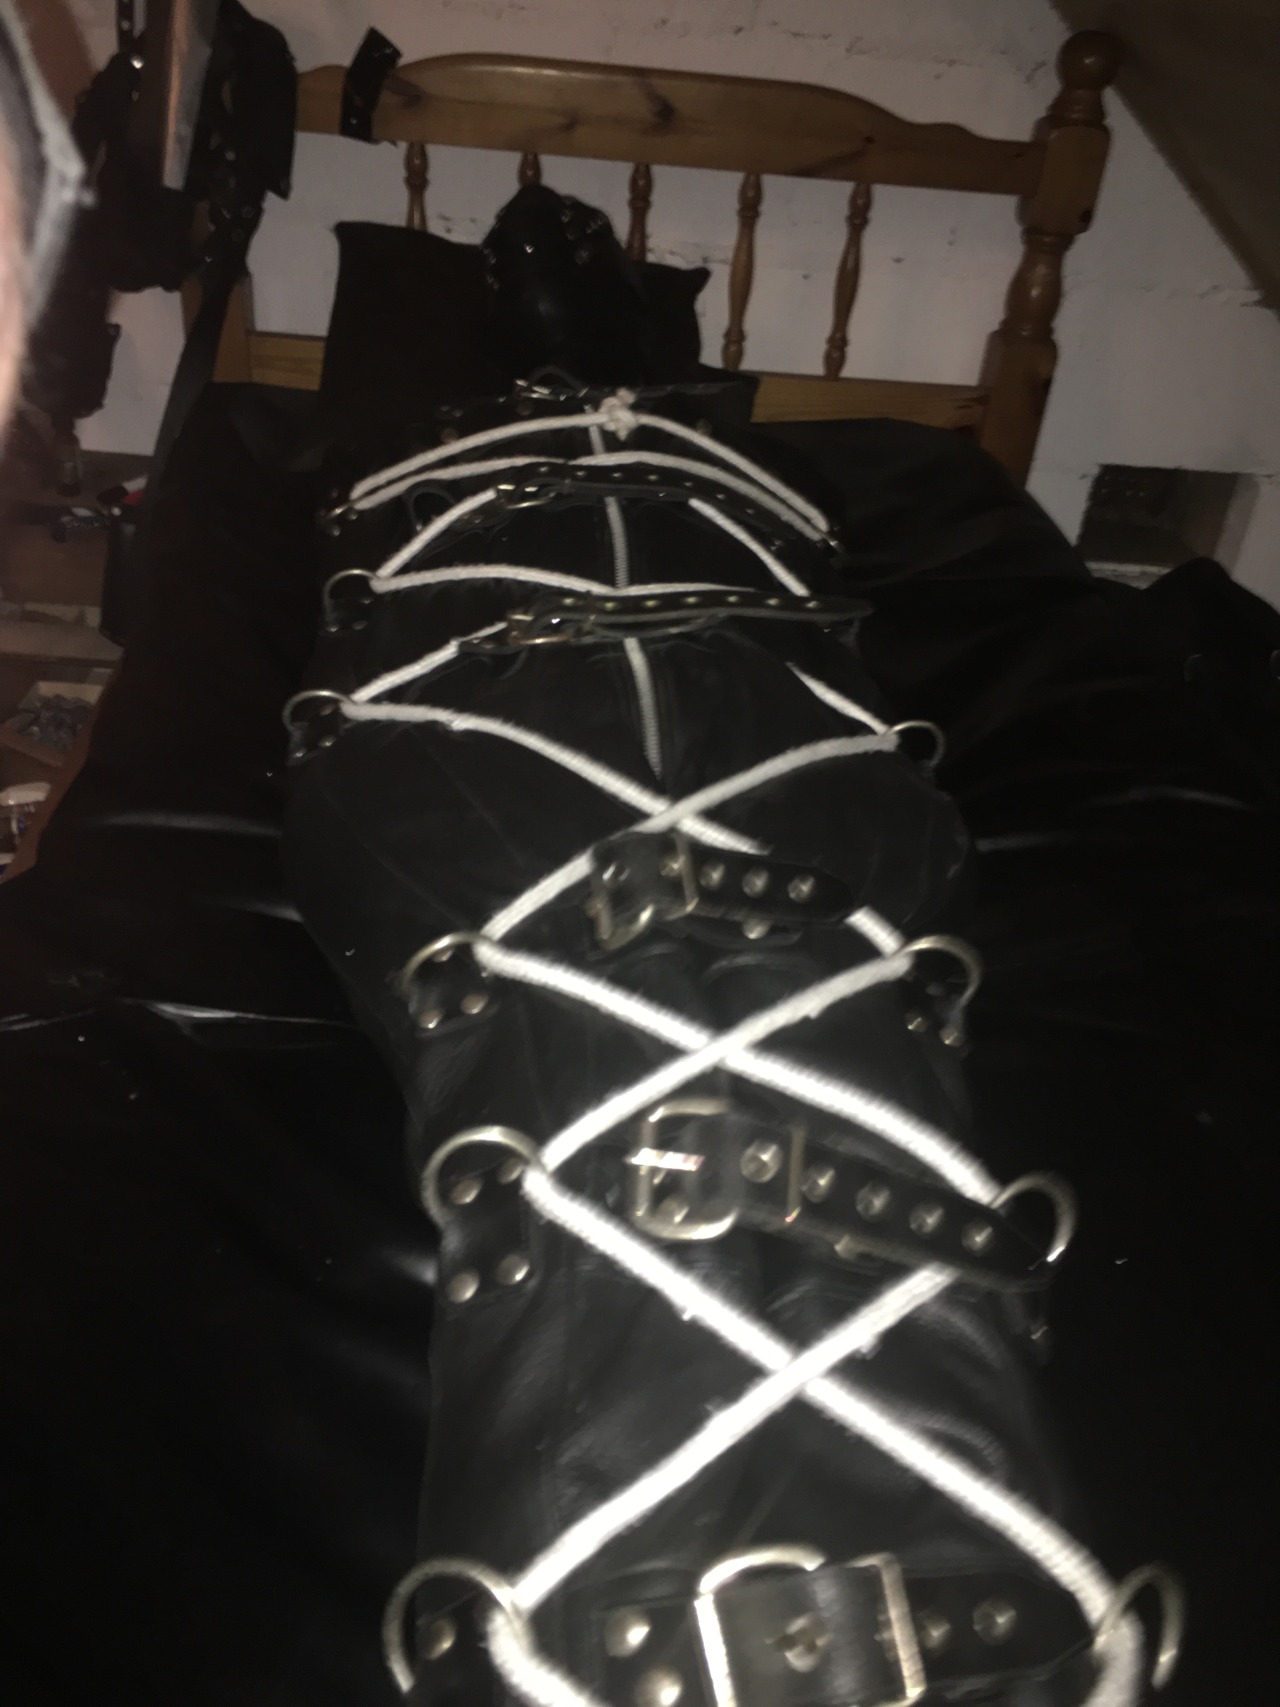 jamesbondagesx: Intruder in uniform and secured in sleep sack, tied to post and milked